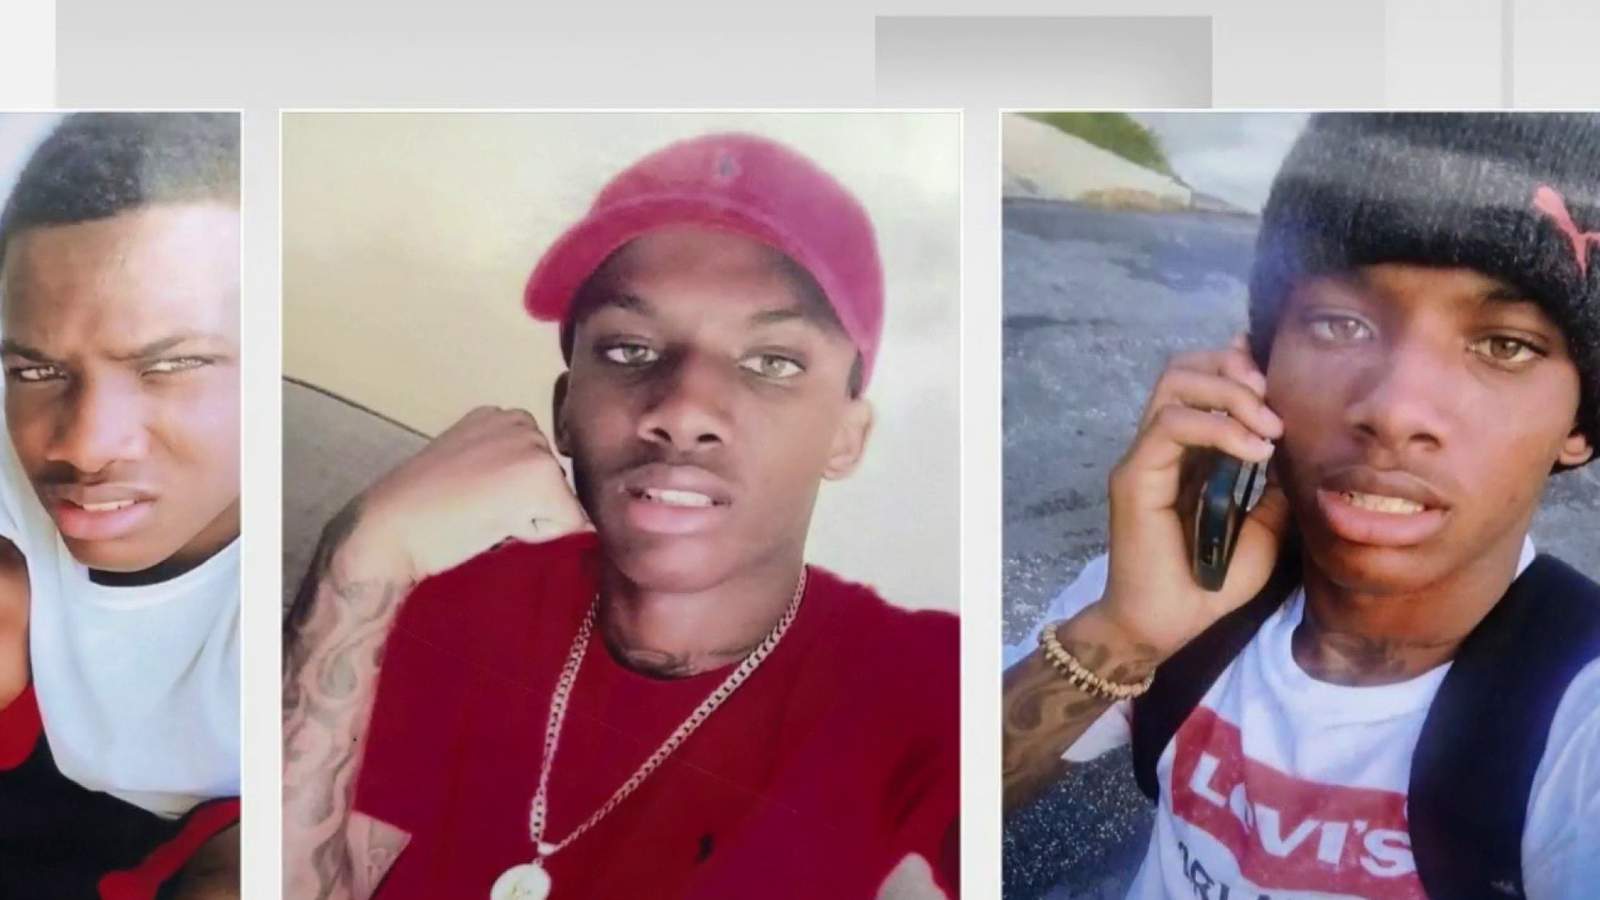 ‘What happened to a taser?‘ Salaythis Melvin’s family demands answers in his shooting